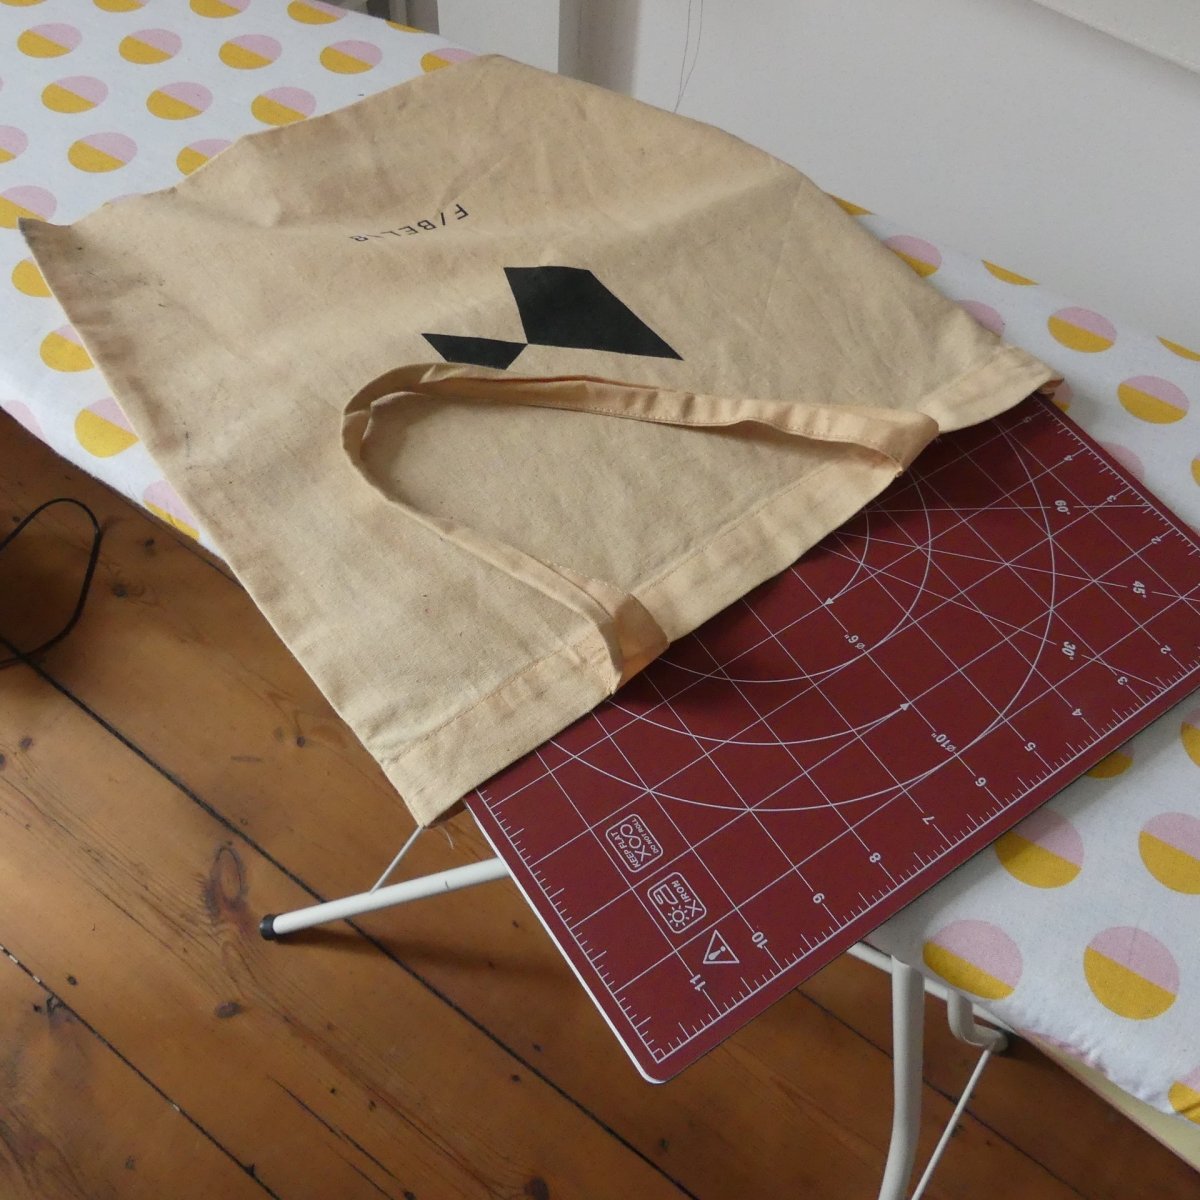 Madam Sew 12 inch rotating cutting mat in a tote bag on a table